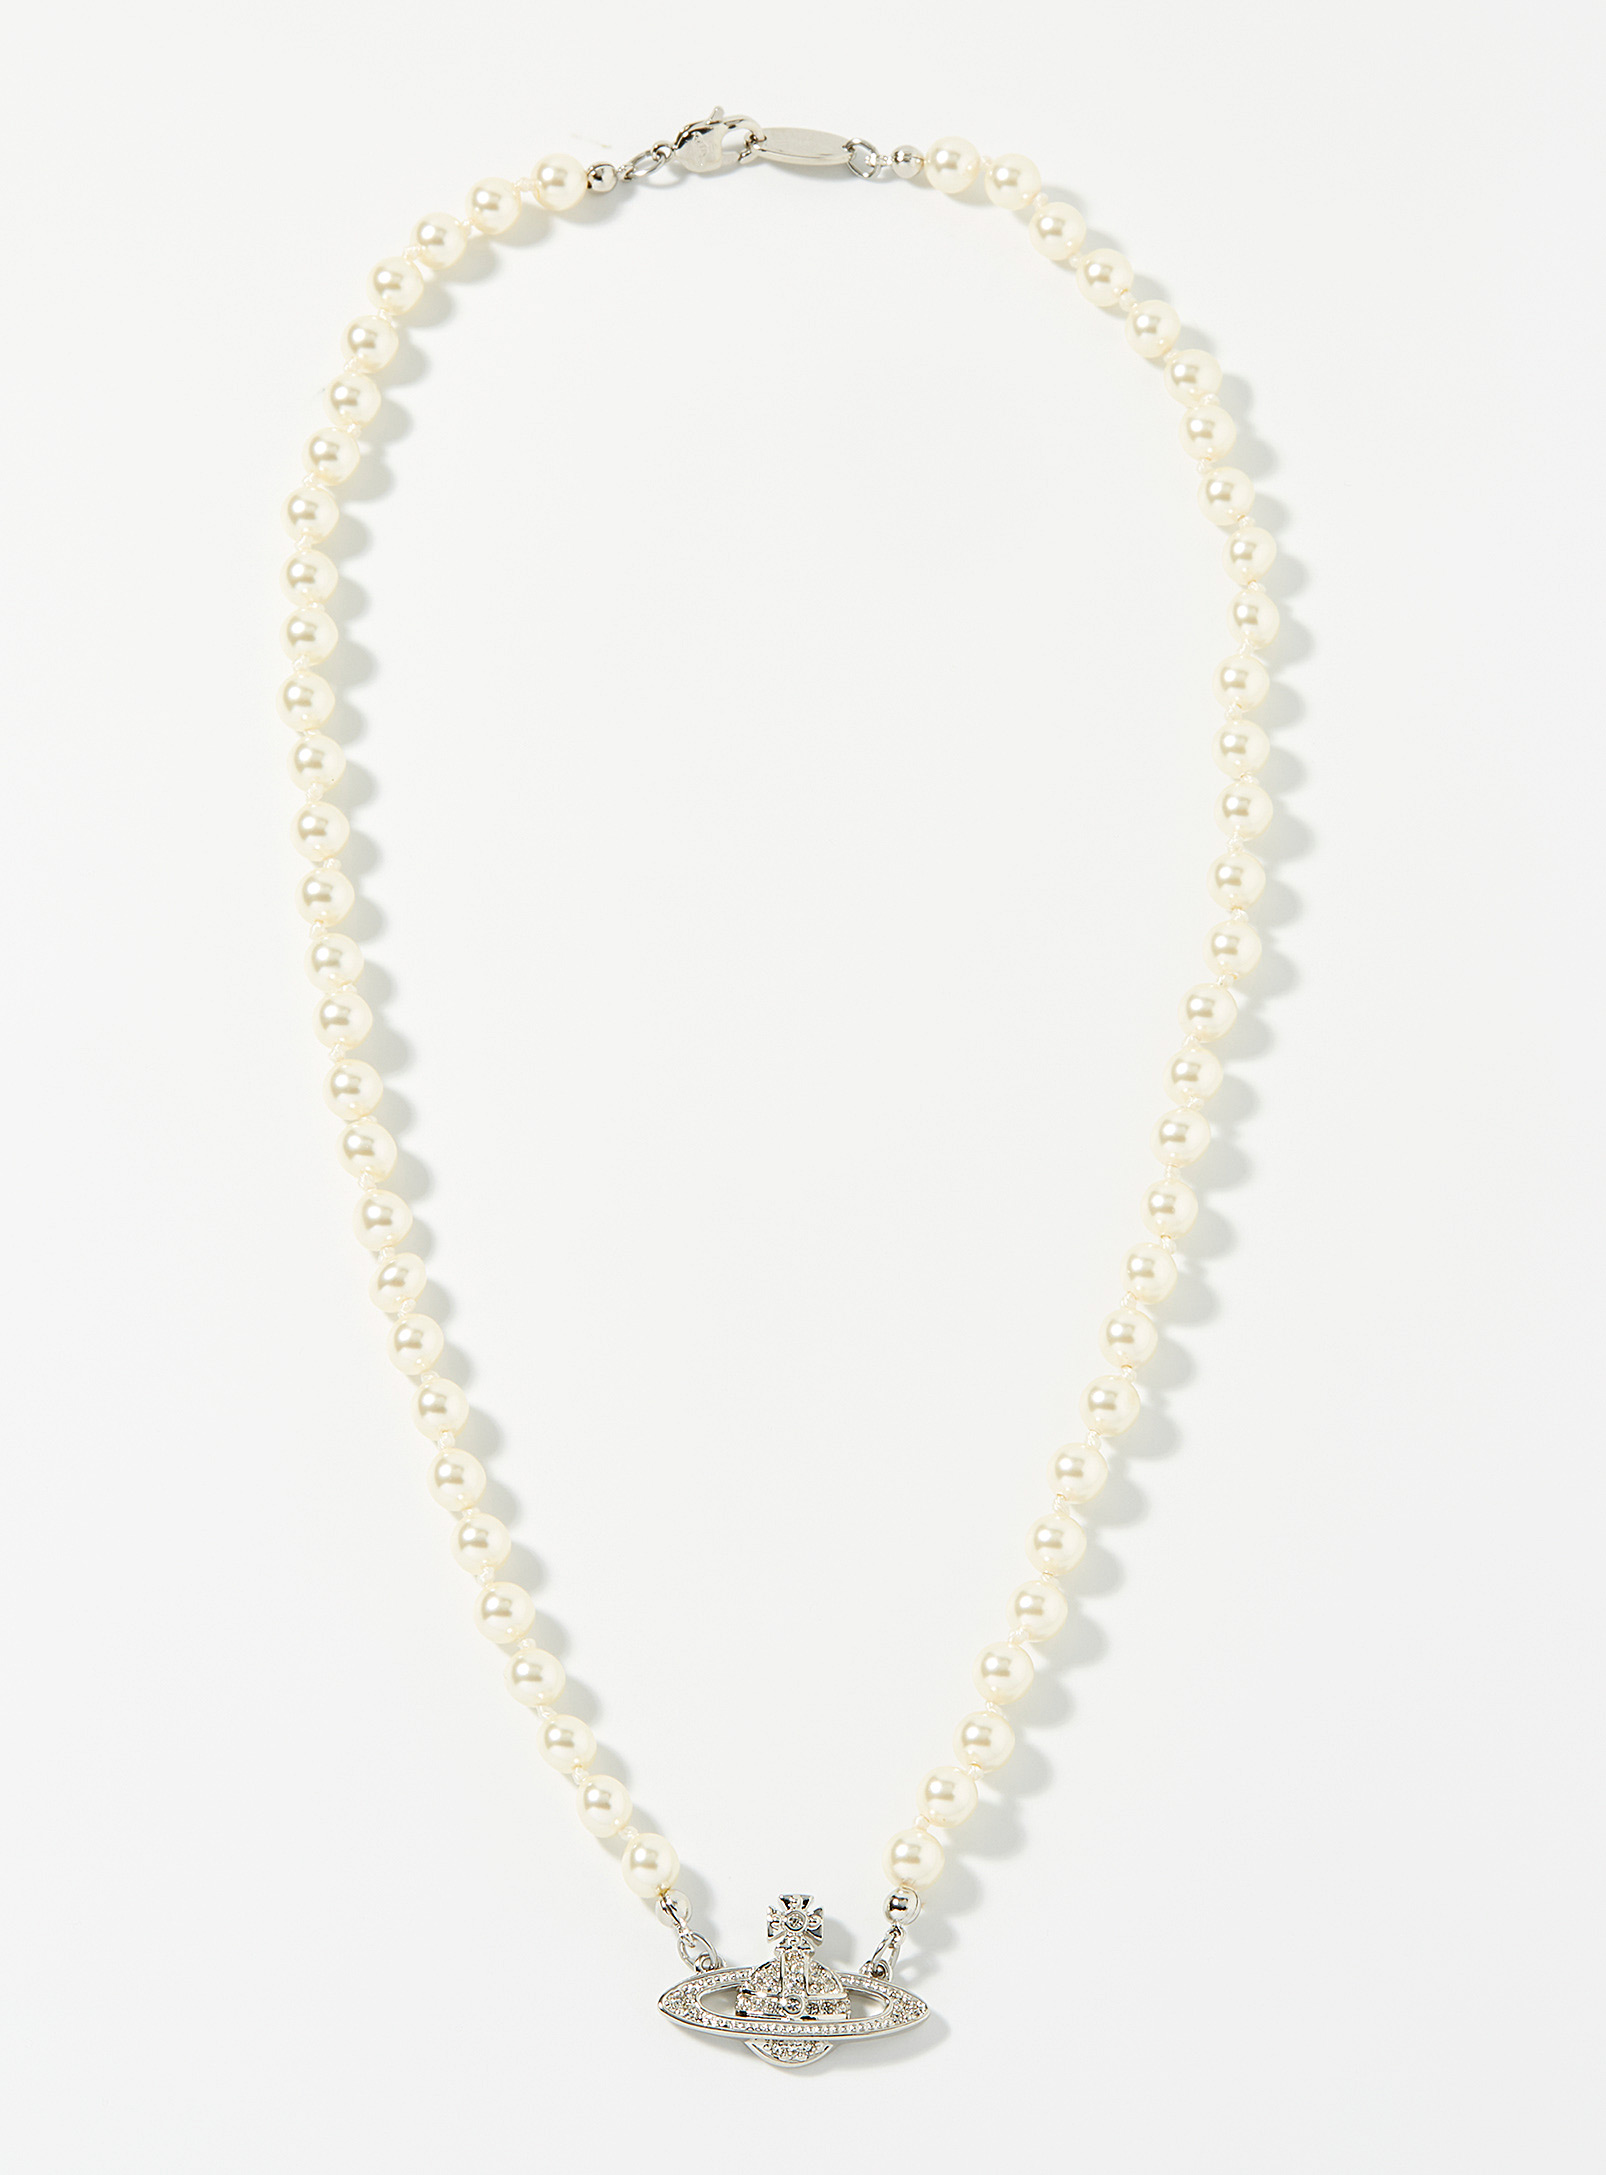 Vivienne Westwood Bas Relief Pearly Bead Necklace In Assorted